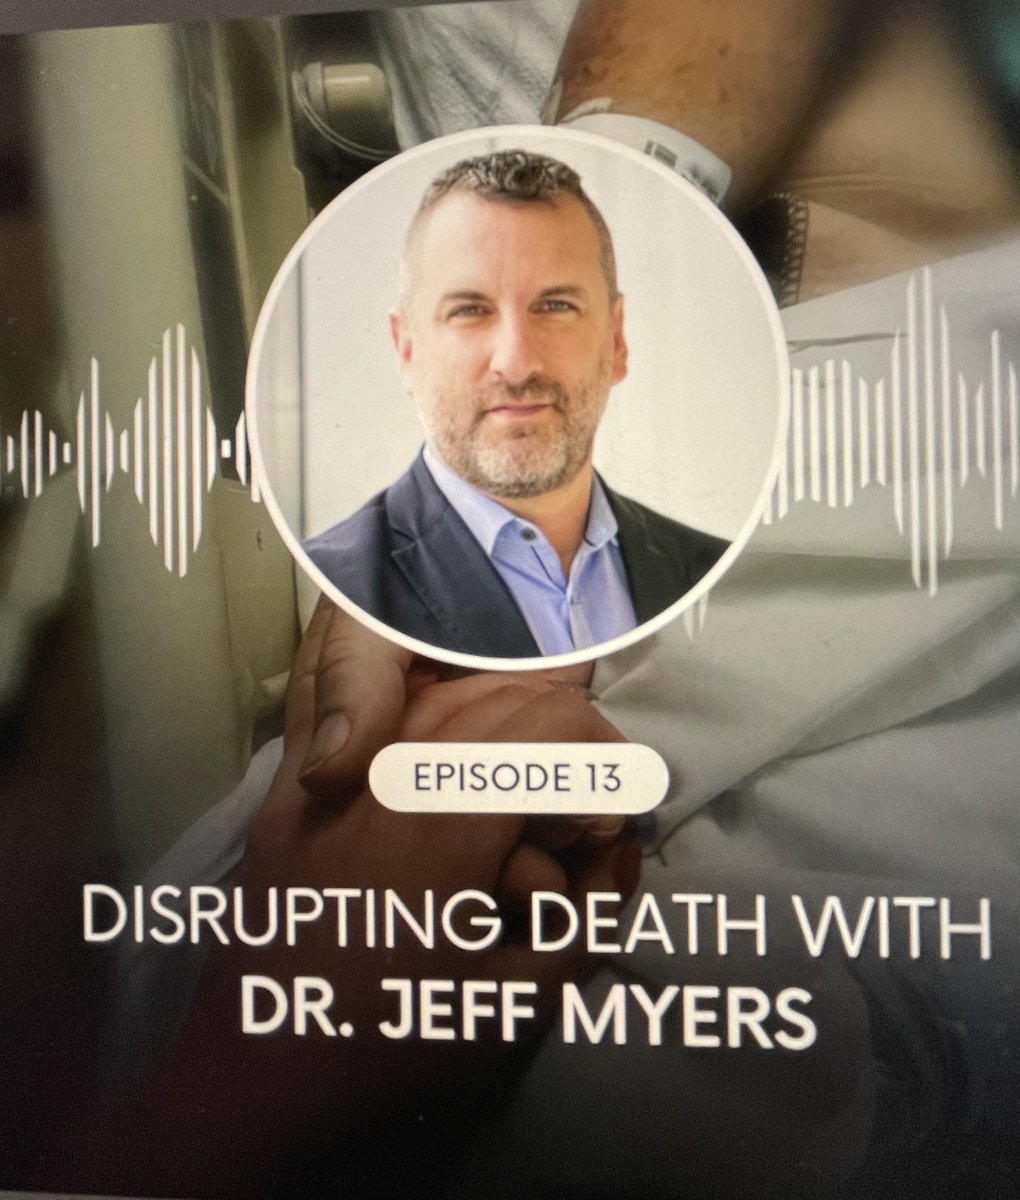 New Episode Alert! Always appreciate the opportunity to talk with Dr. Jeff Myers. In this episode we talk about serious illness conversations, educating future #physicians & the important relationship between #palliativecare and #MAiD. Give our conversation a listen!